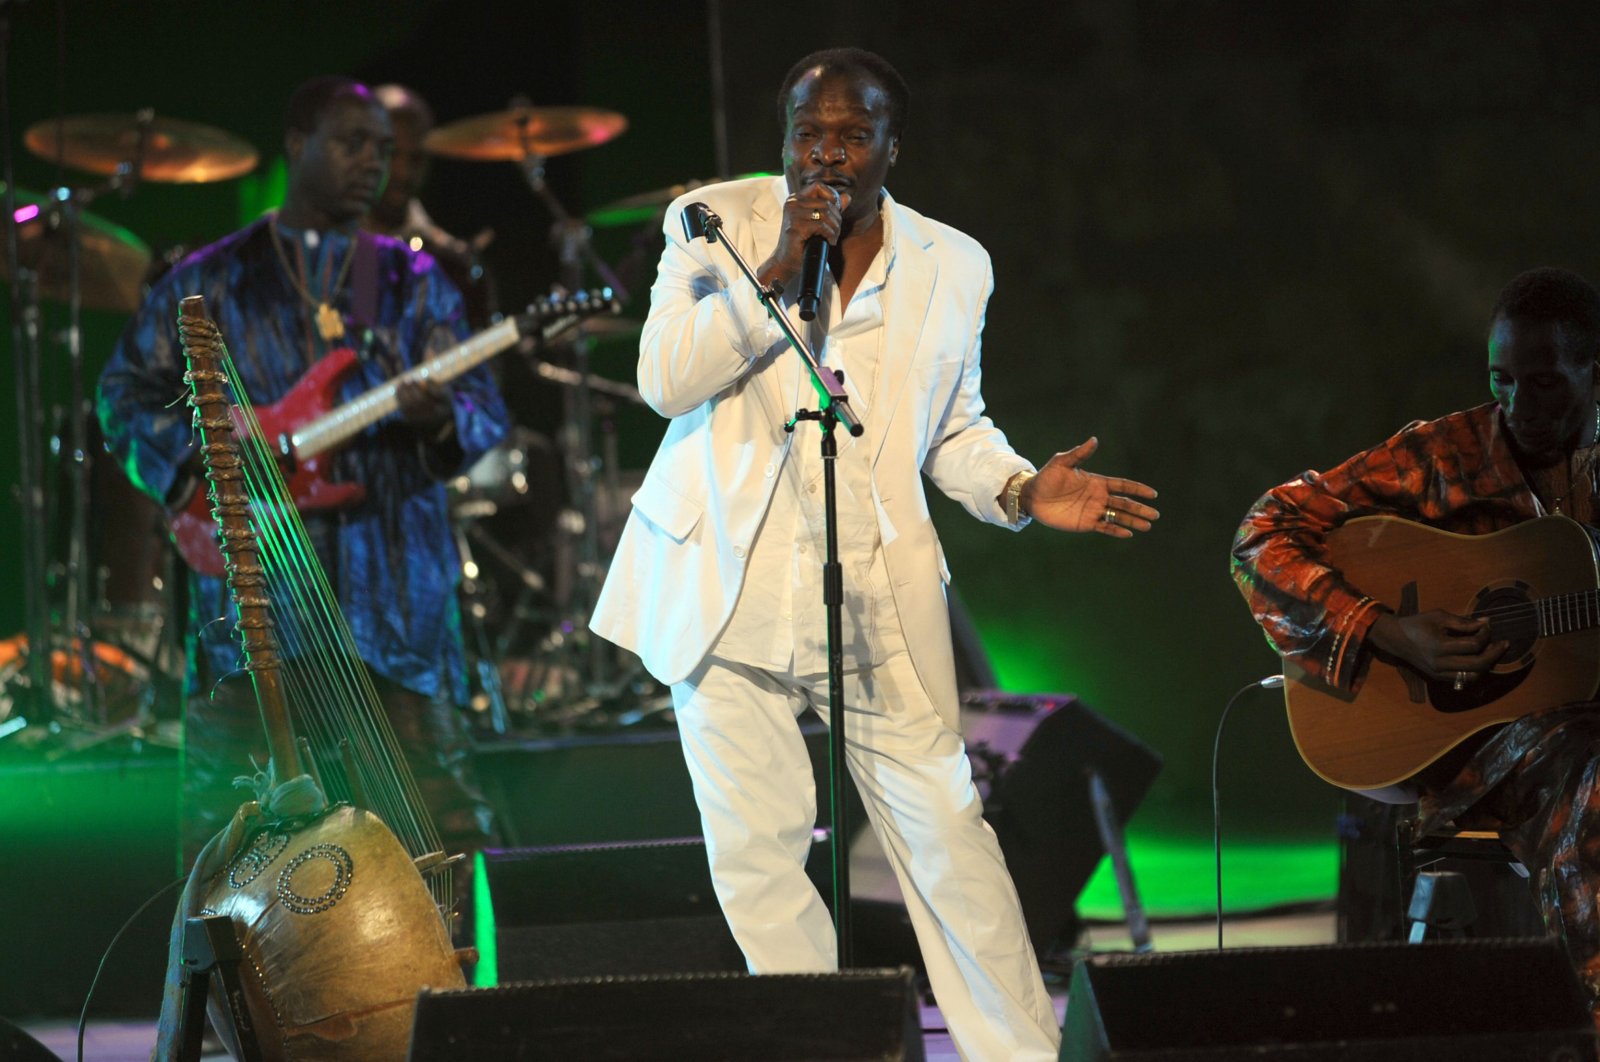 Guinea's singer Mory Kante performs at a Roman theater during the 46th International Festival of Carthage, Carthage, July 14, 2010. (AFP Photo)